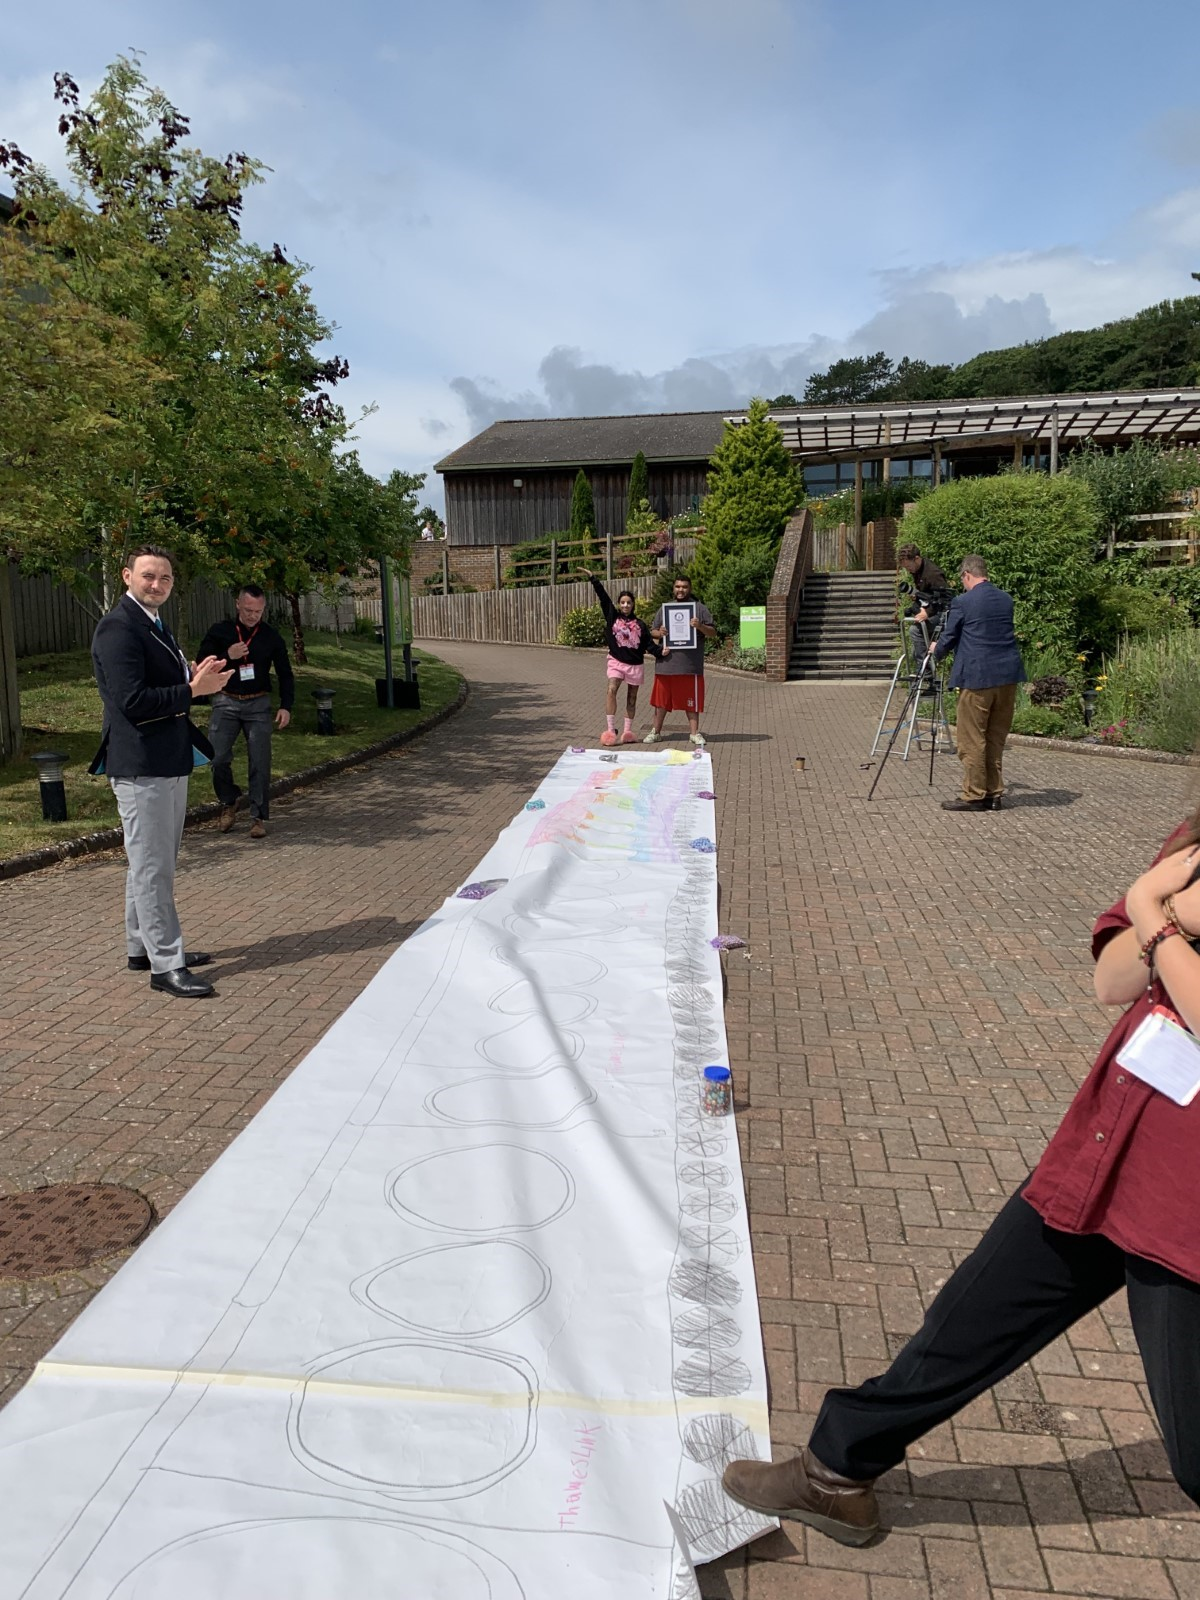 The 20 metre long drawing of a train is unrolled for display